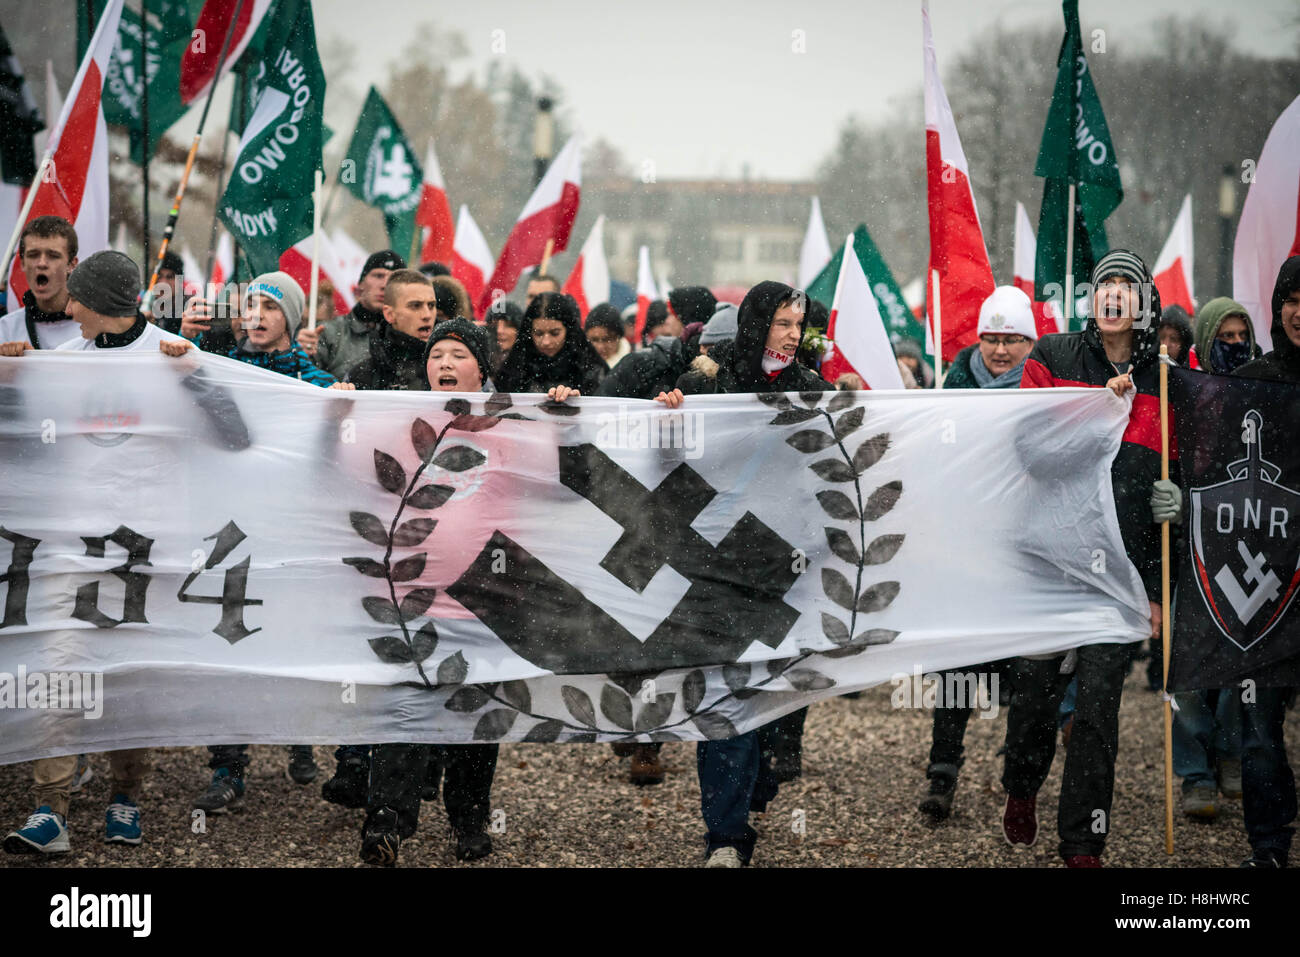 Thousands join the annual march in Warsaw organised by Poland's nationalist right commemorating National Independence Day. Stock Photo